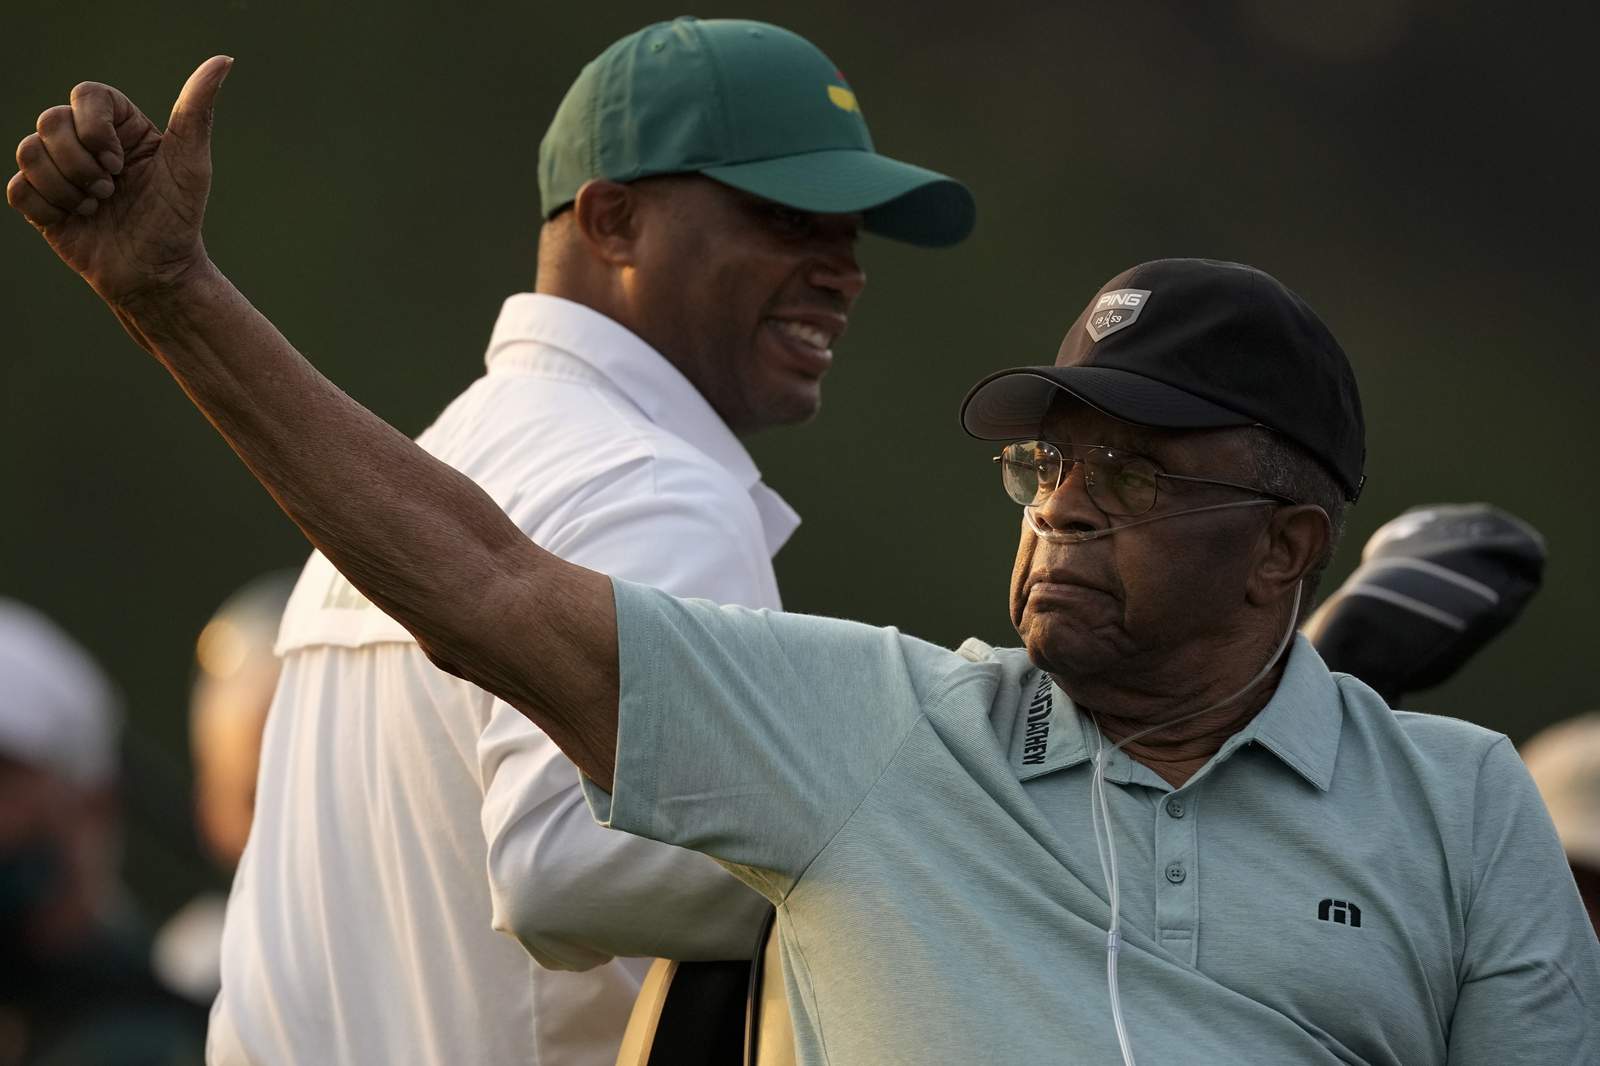 With a wave and smile, Lee Elder helps open the Masters